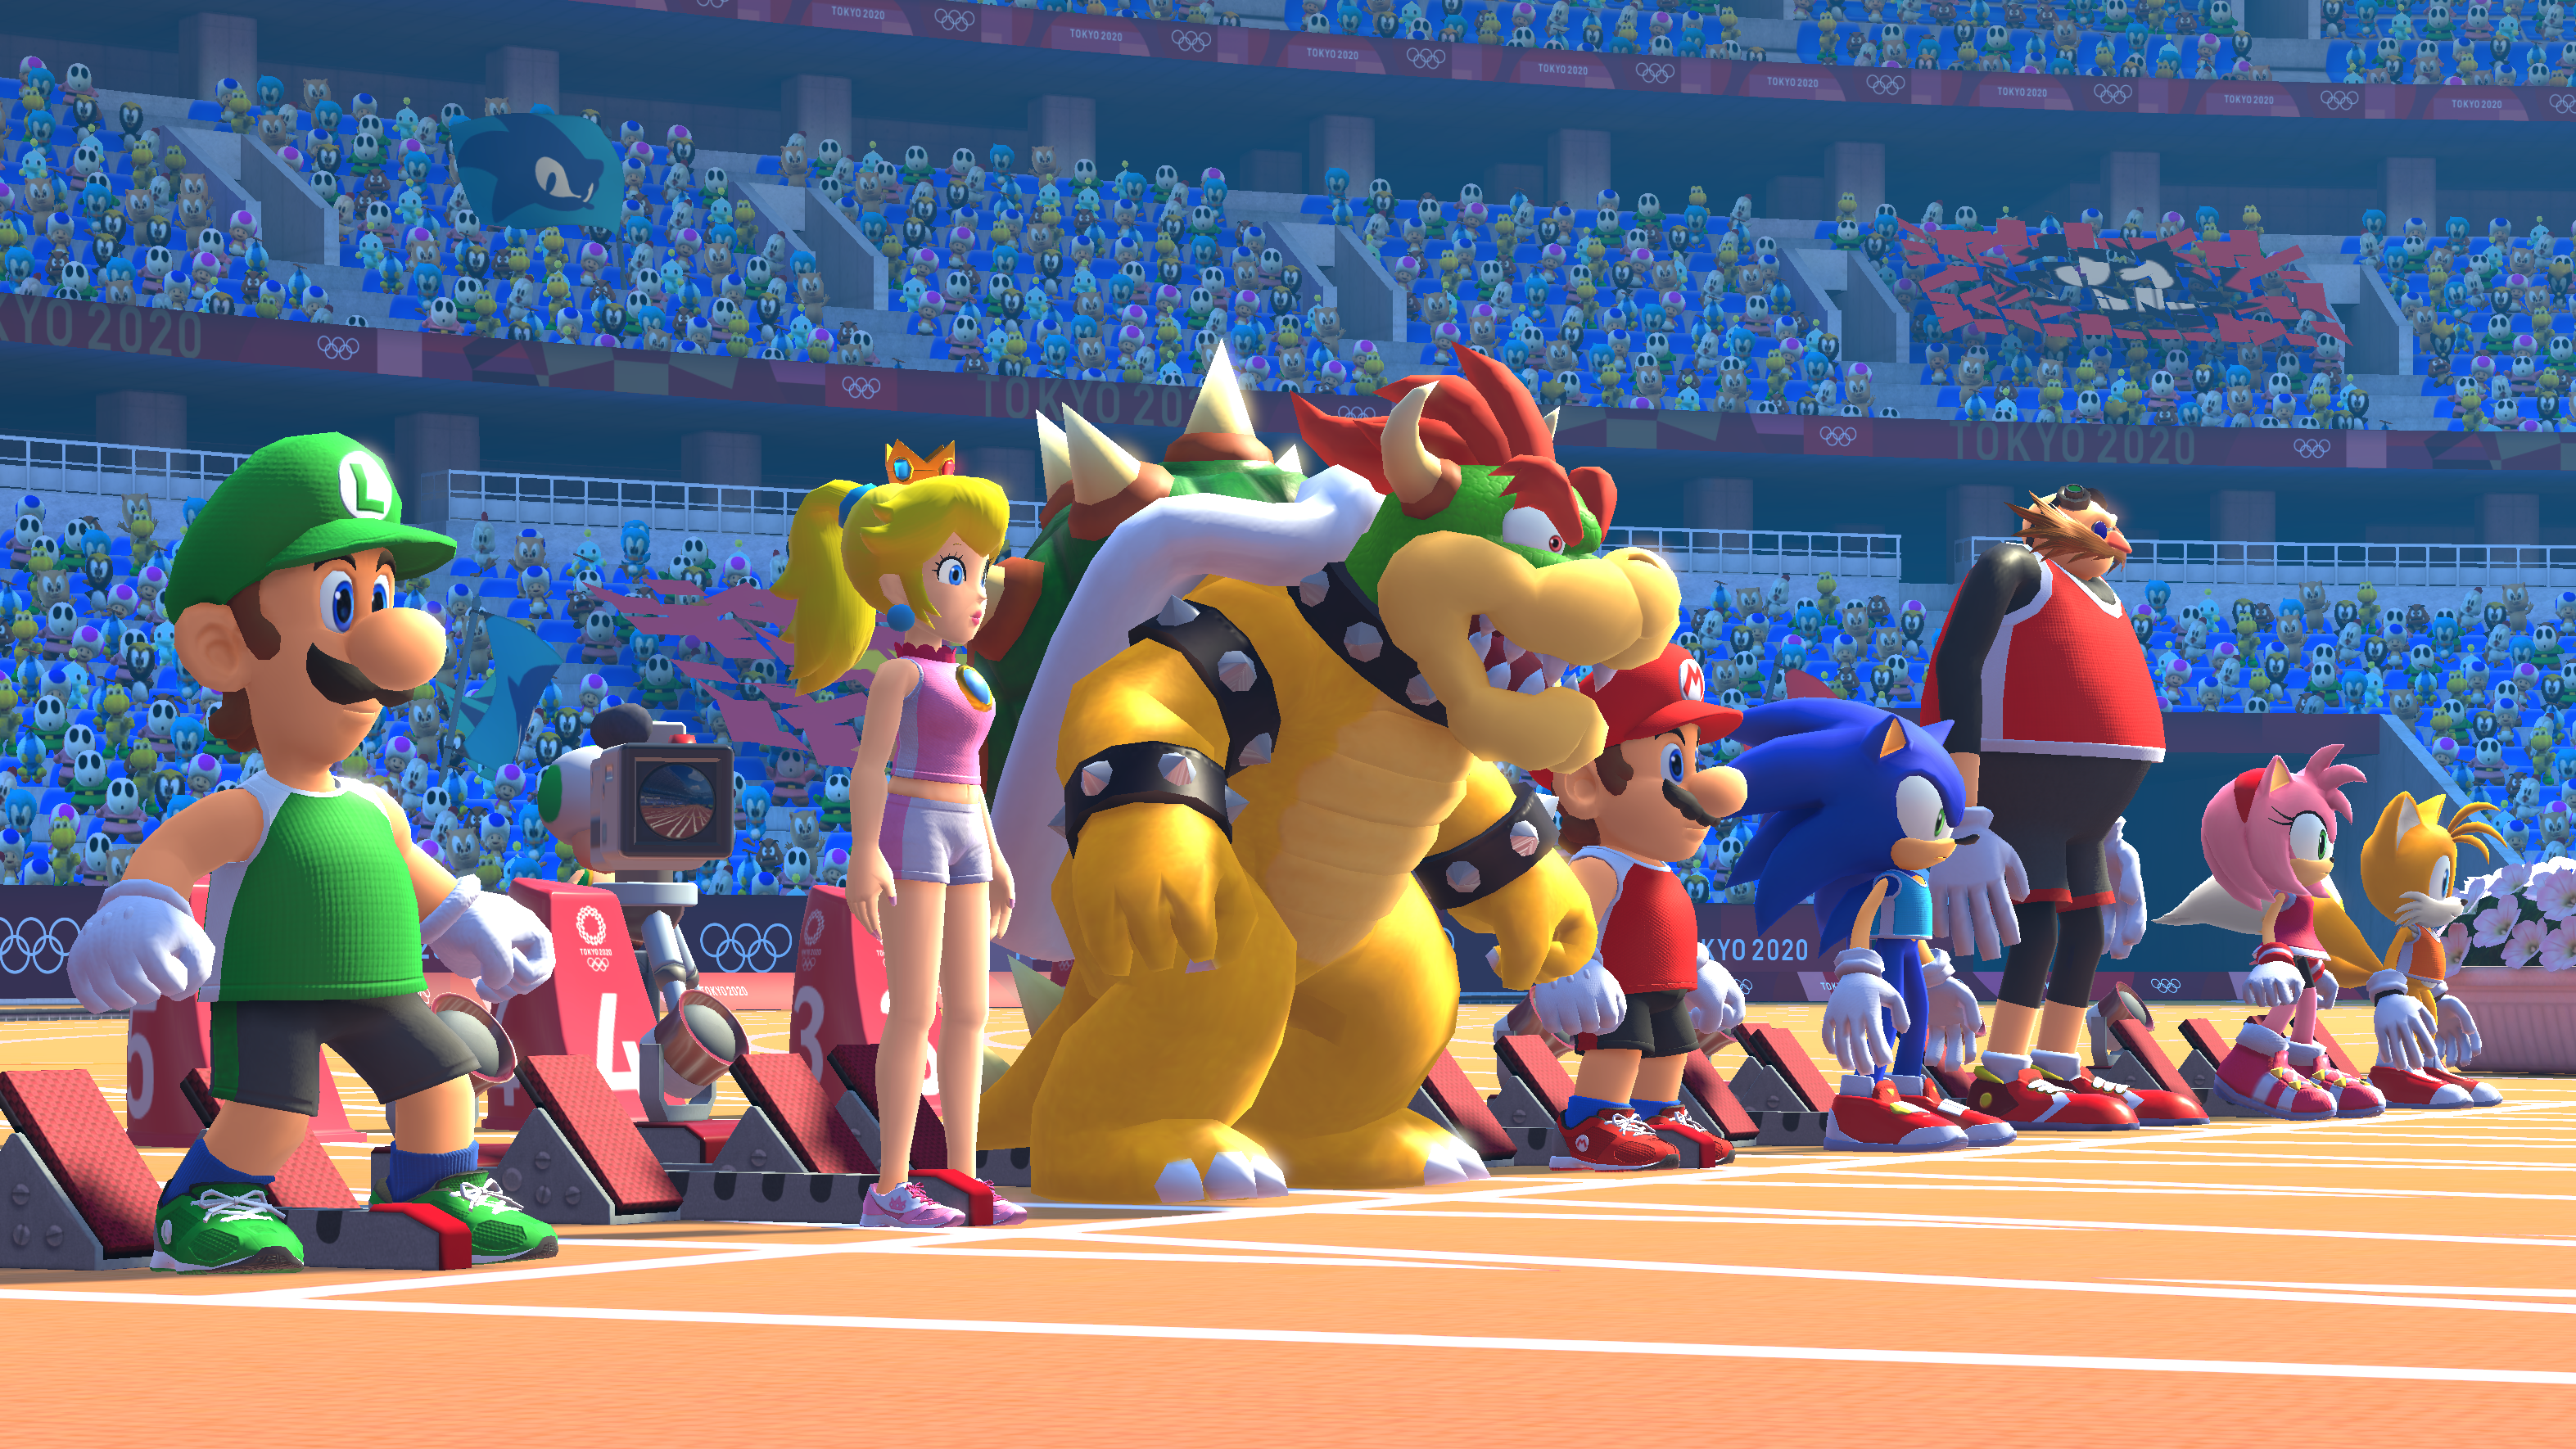 Mario & Sonic at the Olympic Games: Tokyo 2020 - Nintendo Switch - image 8 of 8